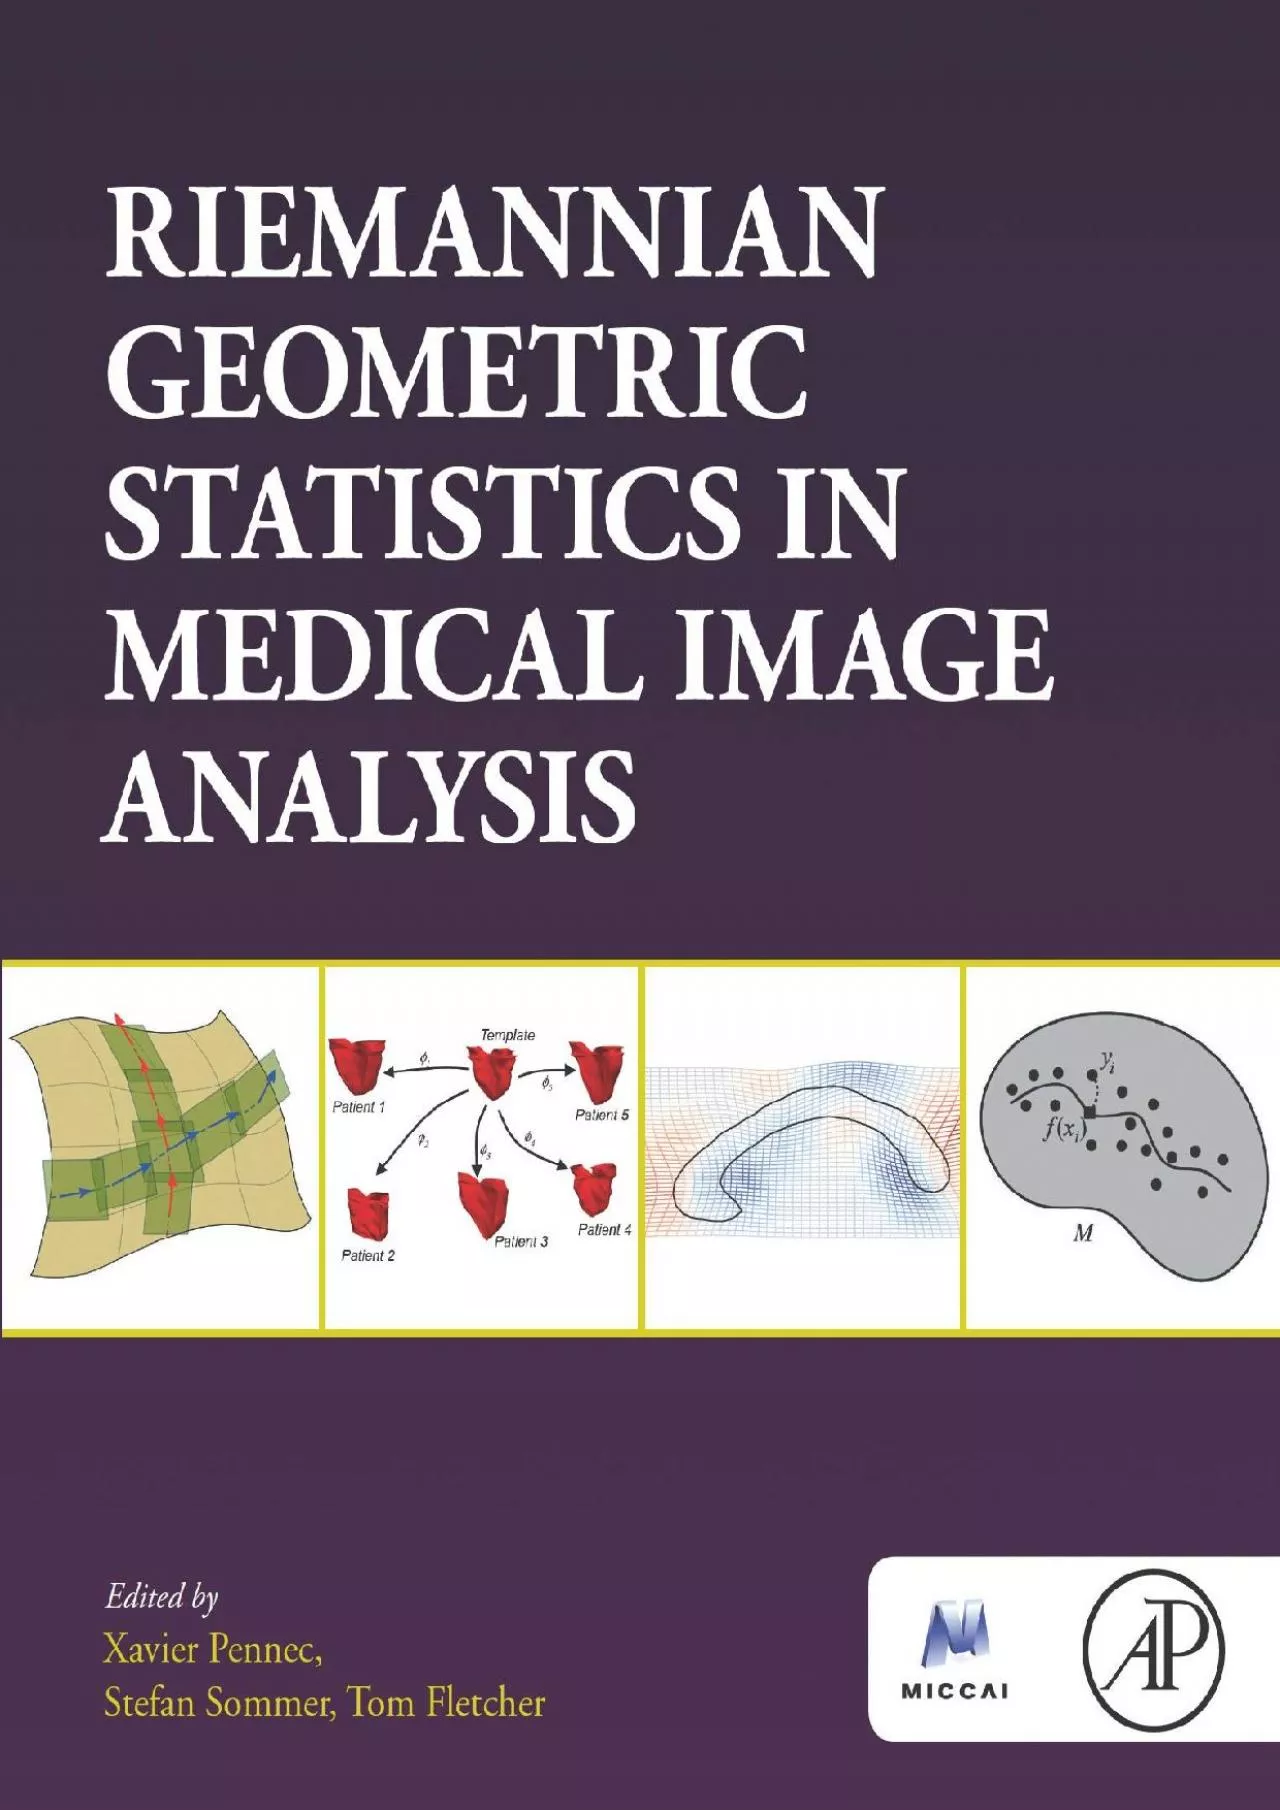 (DOWNLOAD)-Riemannian Geometric Statistics in Medical Image Analysis (The Elsevier and